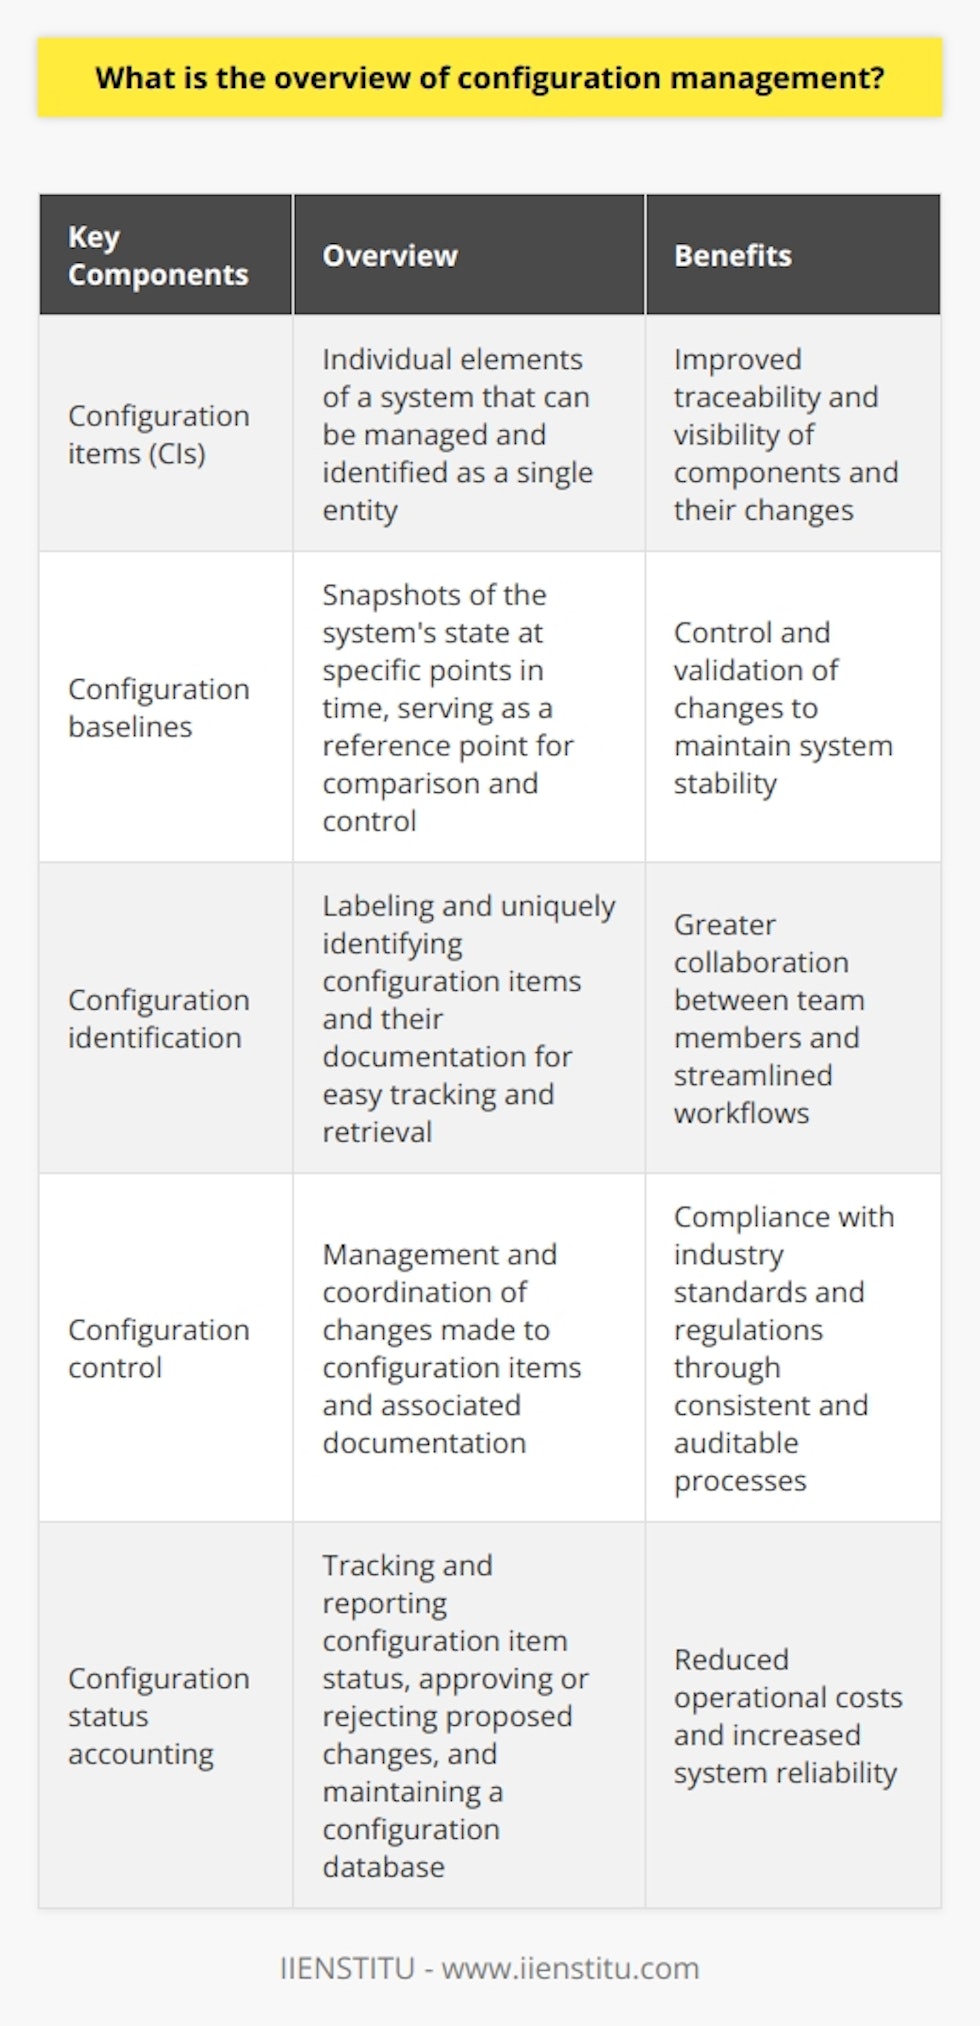 Configuration management is a systematic approach to managing, maintaining, and documenting changes made to software, hardware, and other system components. Its purpose is to ensure the reliability, consistency, and traceability of a product or system. This is achieved by understanding and managing the interdependencies between various components and preventing errors due to uncontrolled changes.A configuration management system consists of several key components. Configuration items (CIs) are individual elements of a system that can be managed and identified as a single entity. Configuration baselines are snapshots of the system's state at specific points in time, serving as a reference point for comparison and control. Configuration identification involves labeling and uniquely identifying configuration items and their documentation for easy tracking and retrieval. Configuration control is the management and coordination of changes made to configuration items and associated documentation. Configuration status accounting involves tracking and reporting configuration item status, approving or rejecting proposed changes, and maintaining a configuration database. Configuration audits are reviews conducted to ensure adherence to defined processes, procedures, and quality standards.Implementing an effective configuration management system is crucial for organizations developing, maintaining, and operating complex systems or products within budget and timeline constraints. Configuration management offers numerous benefits and has applications in various industries such as aviation, automotive, information technology, energy, and defense.The benefits of configuration management include improved traceability and visibility of components and their changes, enhancing decision-making processes. It also allows for controlling and validating changes to maintain system stability. Configuration management promotes greater collaboration between team members, resulting in streamlined workflows and reduced redundancy. Compliance with industry standards and regulations is improved through consistent and auditable processes. Operational costs are reduced, and system reliability is increased by minimizing the risk of errors or conflicts caused by uncontrolled changes.In conclusion, configuration management is essential for controlling and maintaining the integrity of complex systems. By implementing a standardized configuration management approach, organizations can increase efficiency, reduce risks, and deliver high-quality products that meet or exceed customer expectations.